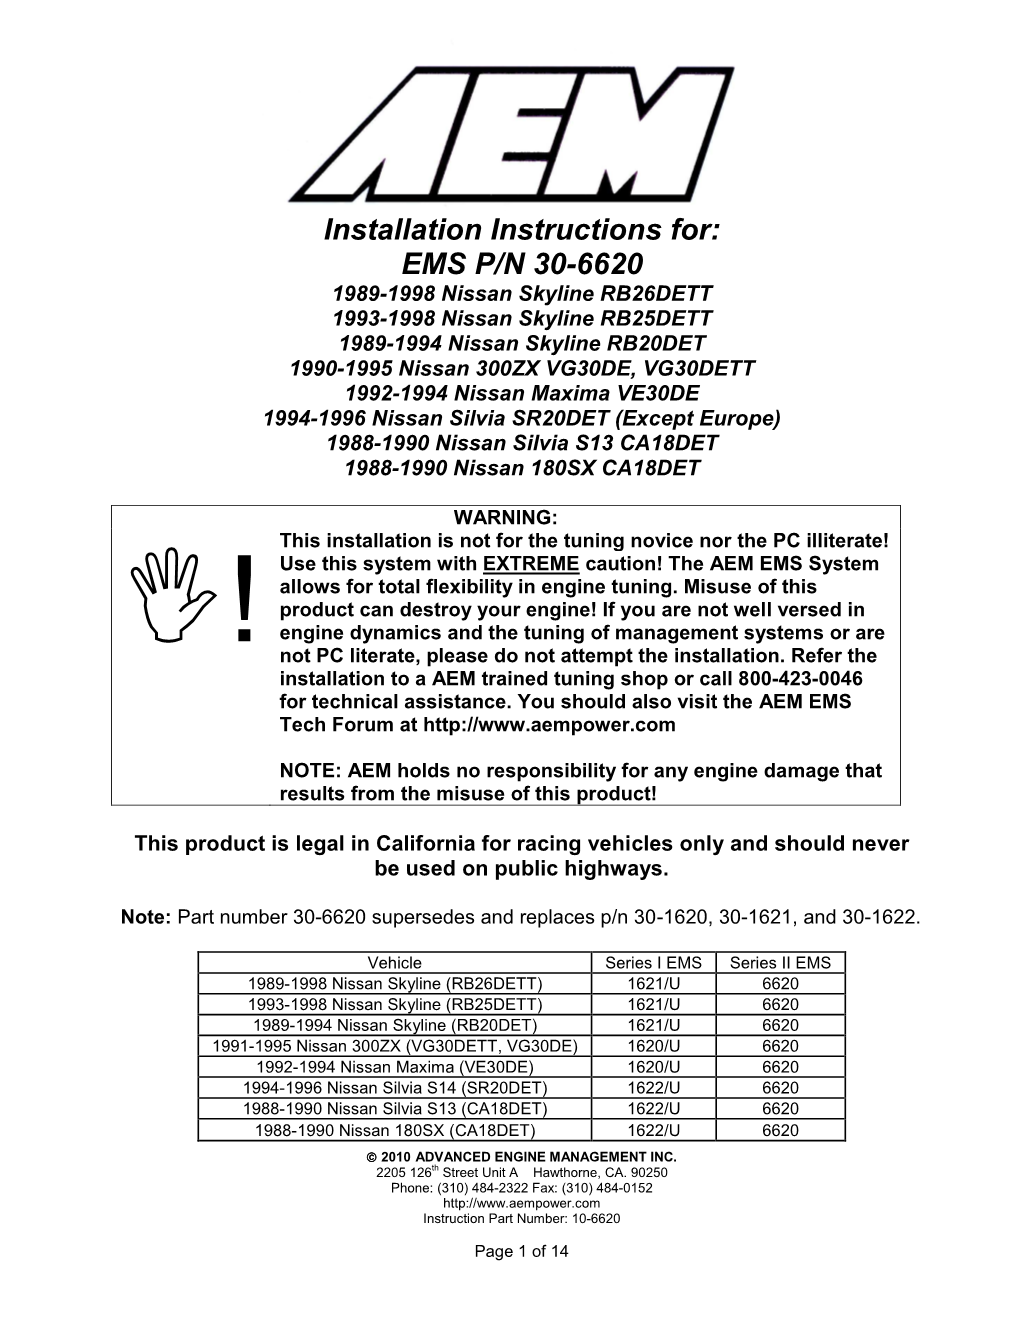 Installation Instructions For: EMS P/N 30-6620